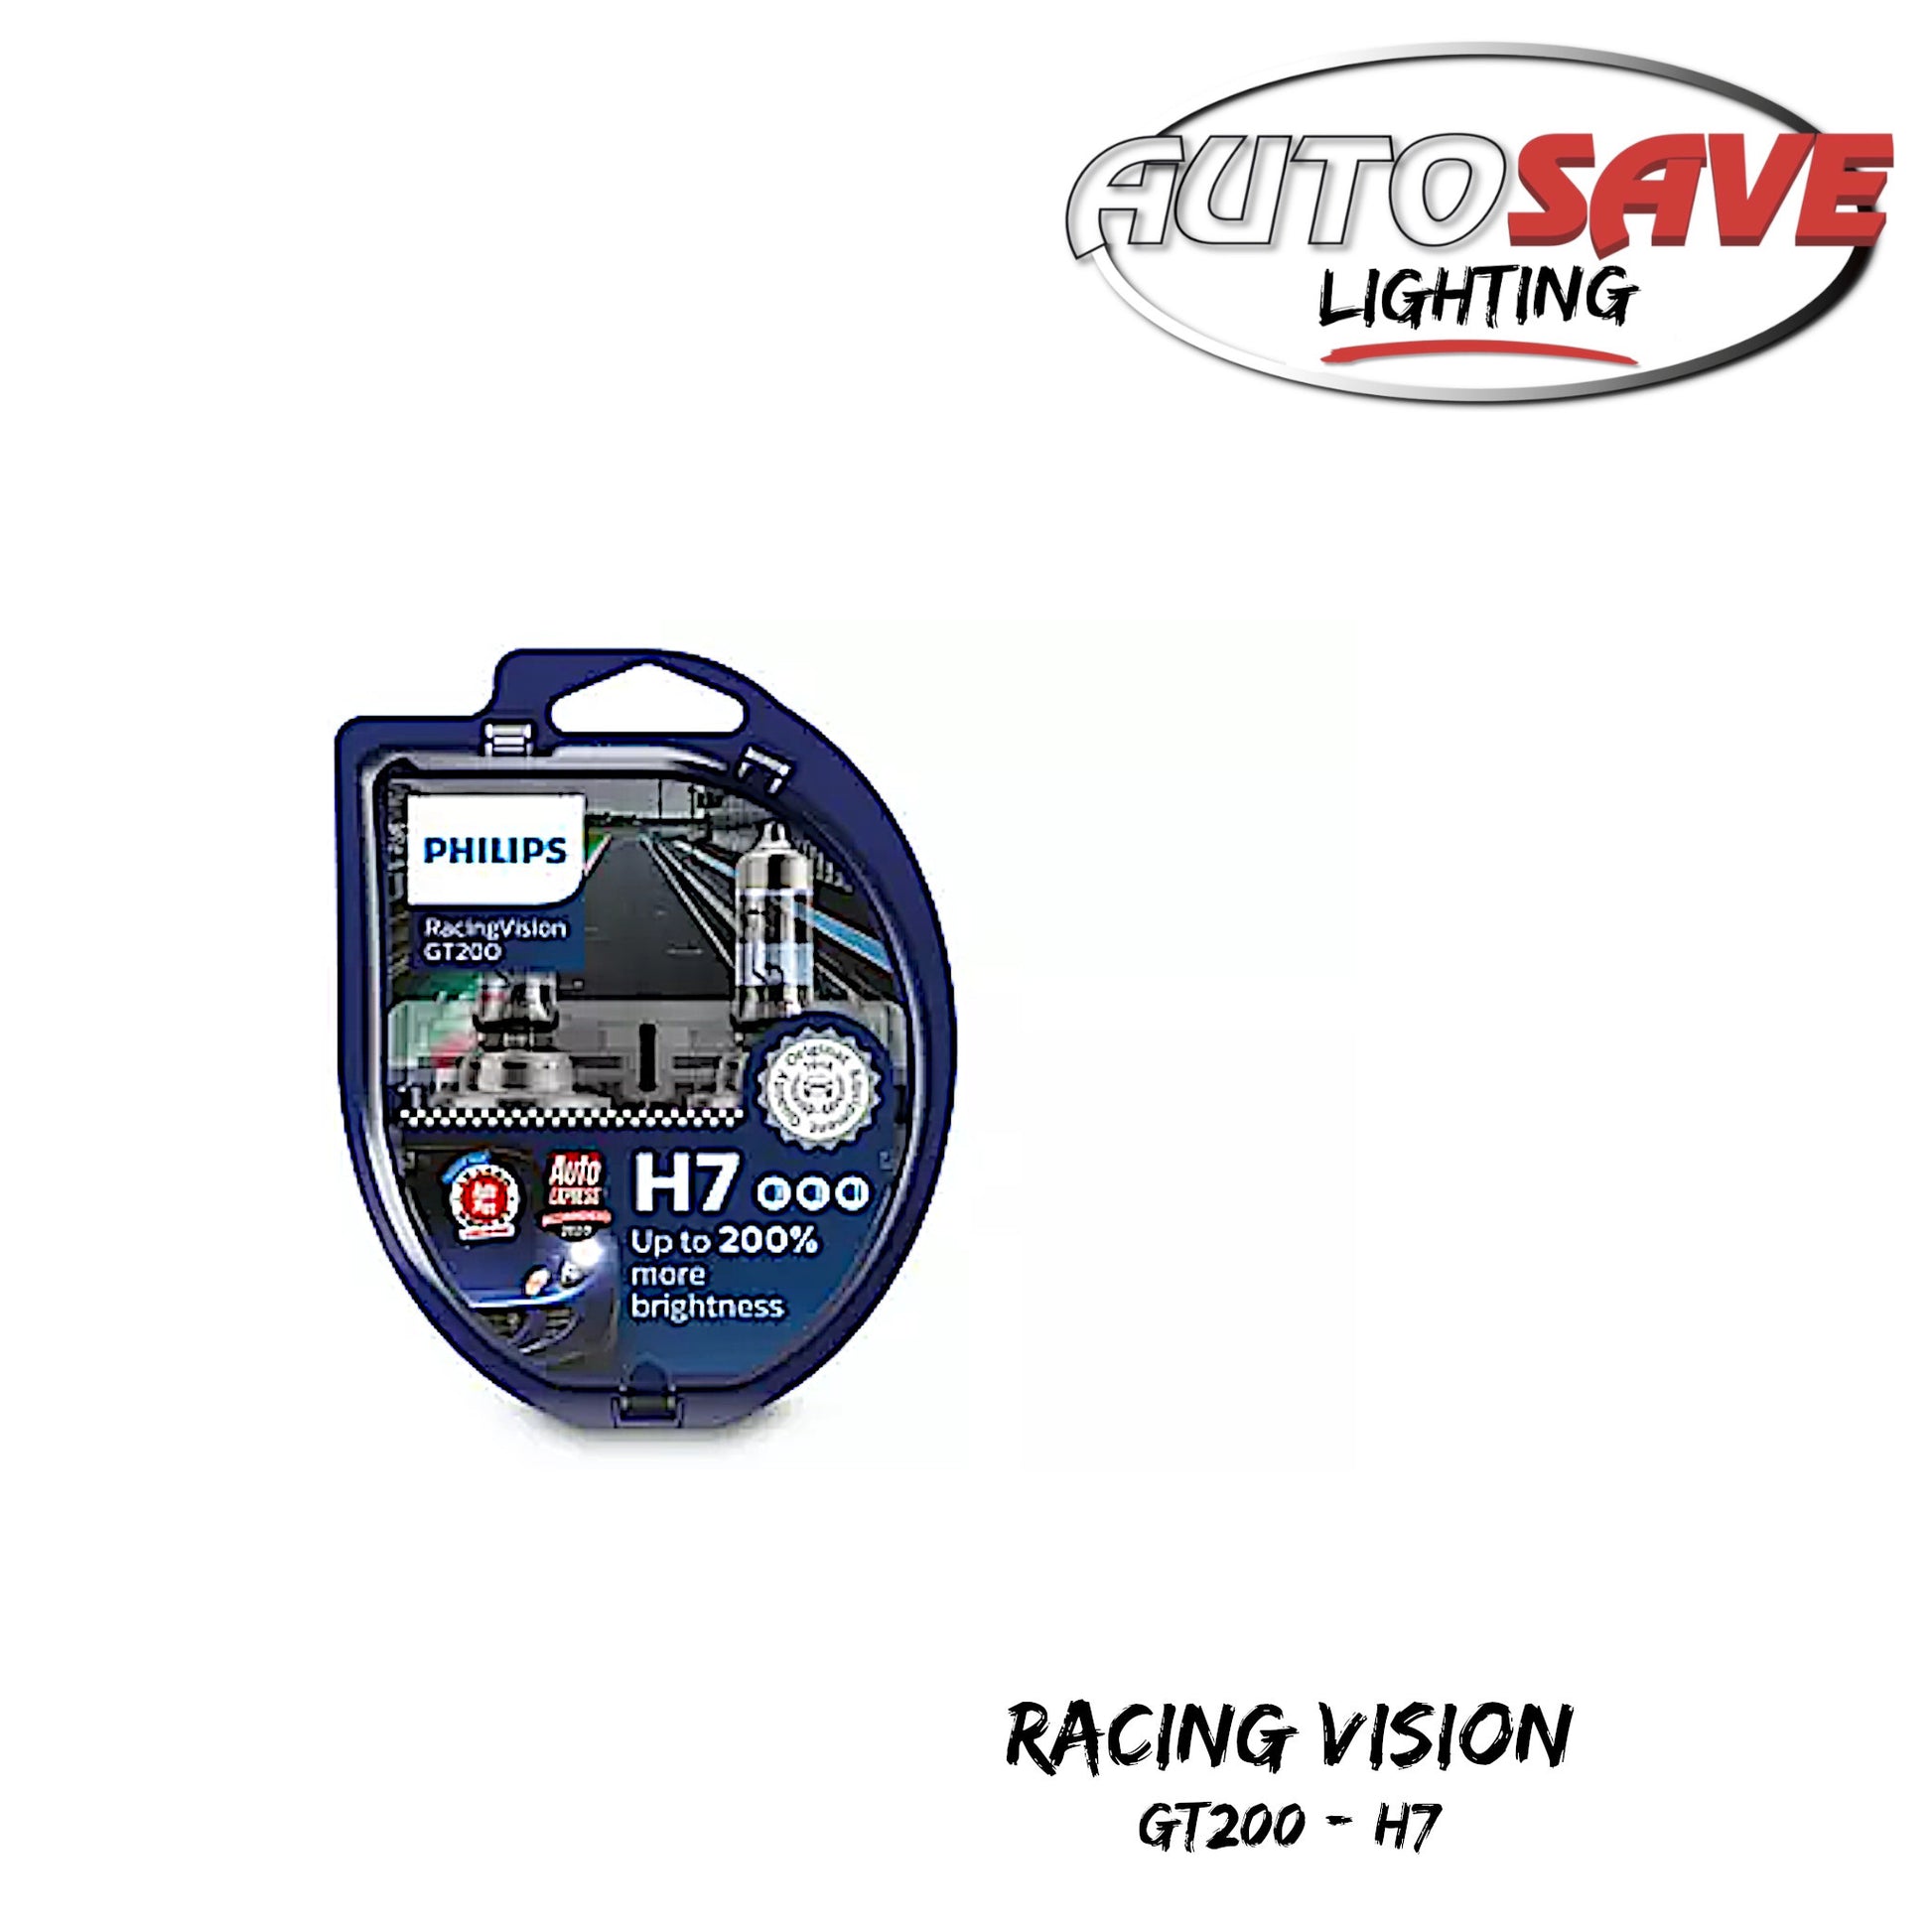 Philips RacingVision GT200 H7 (Twin), philips h7